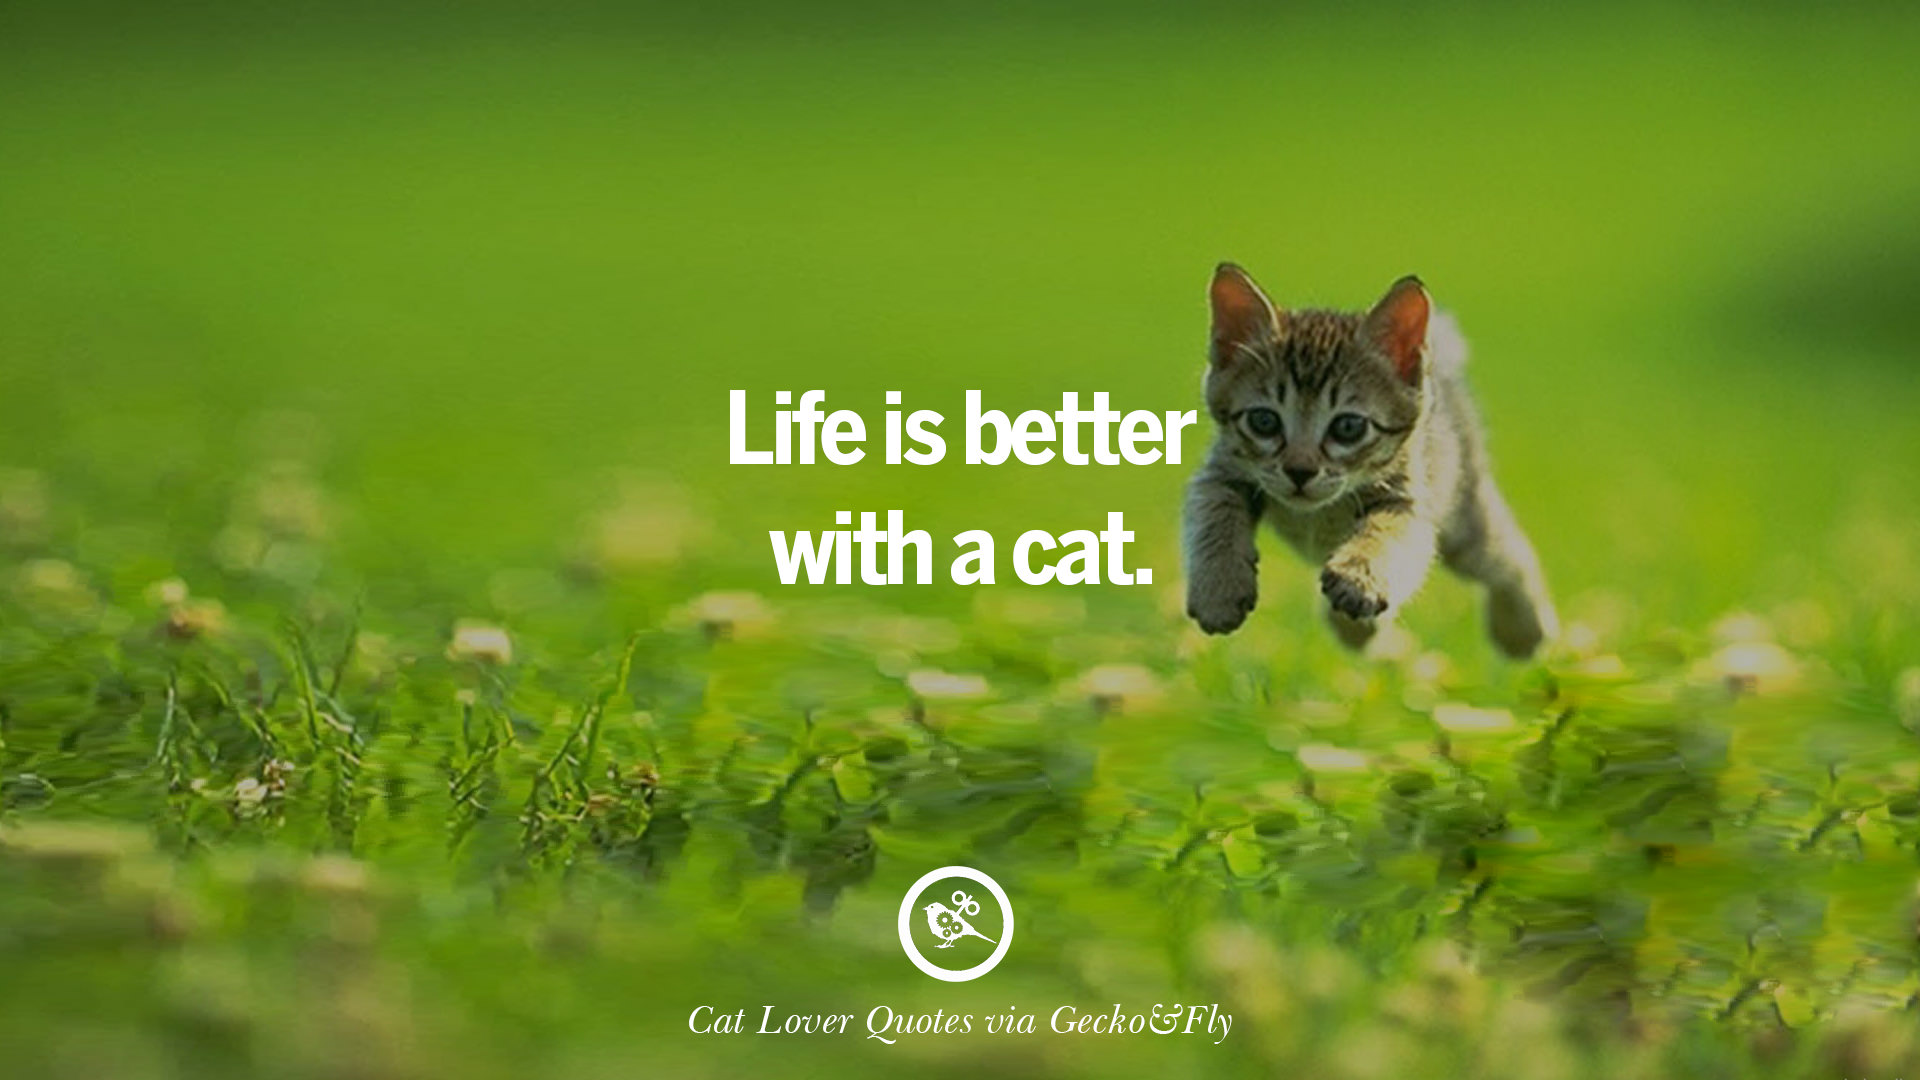 25 Cute Cat Images With Quotes For Crazy Cat Ladies, Gentlemen And Lovers